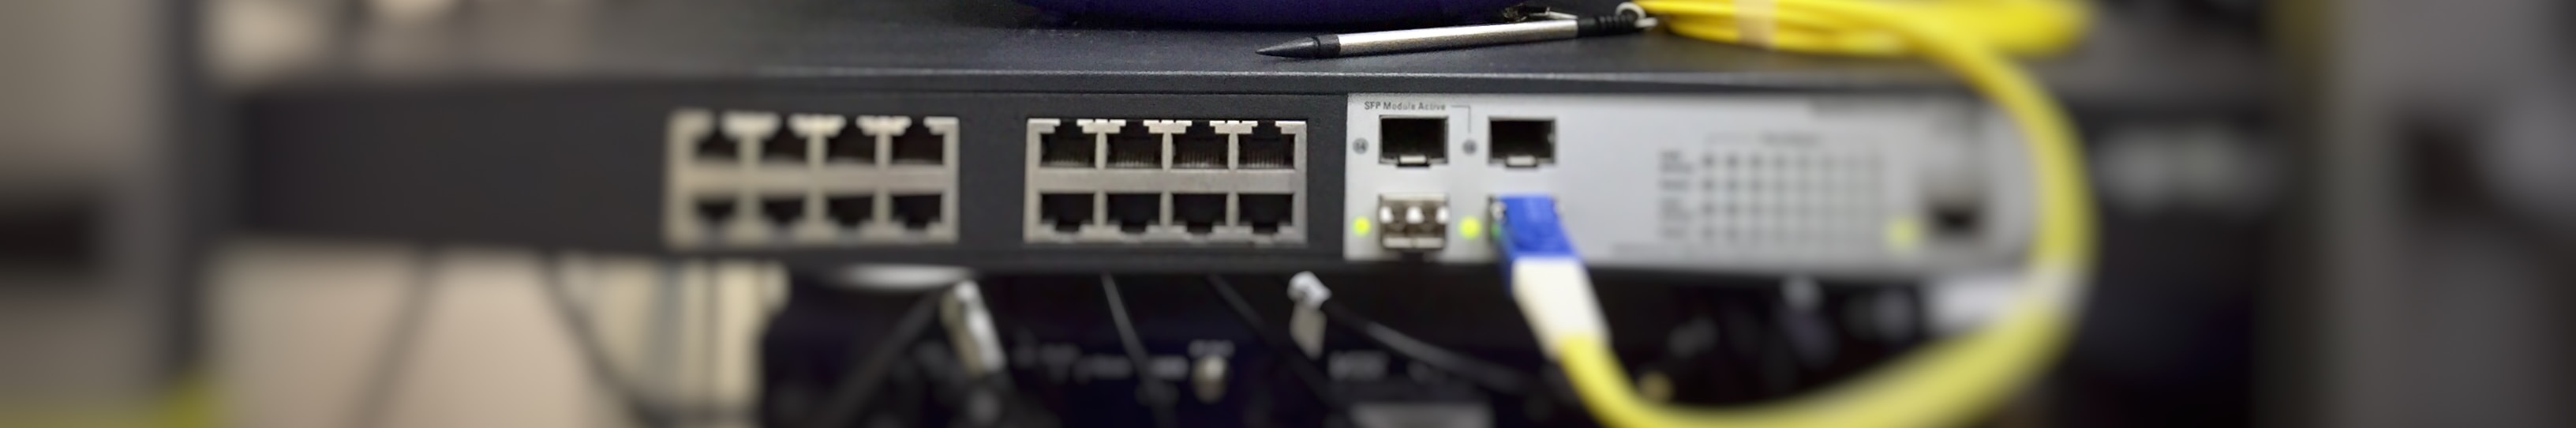 Juniper Networks' flagship router helps companies lower energy usage by an estimated 62-70%